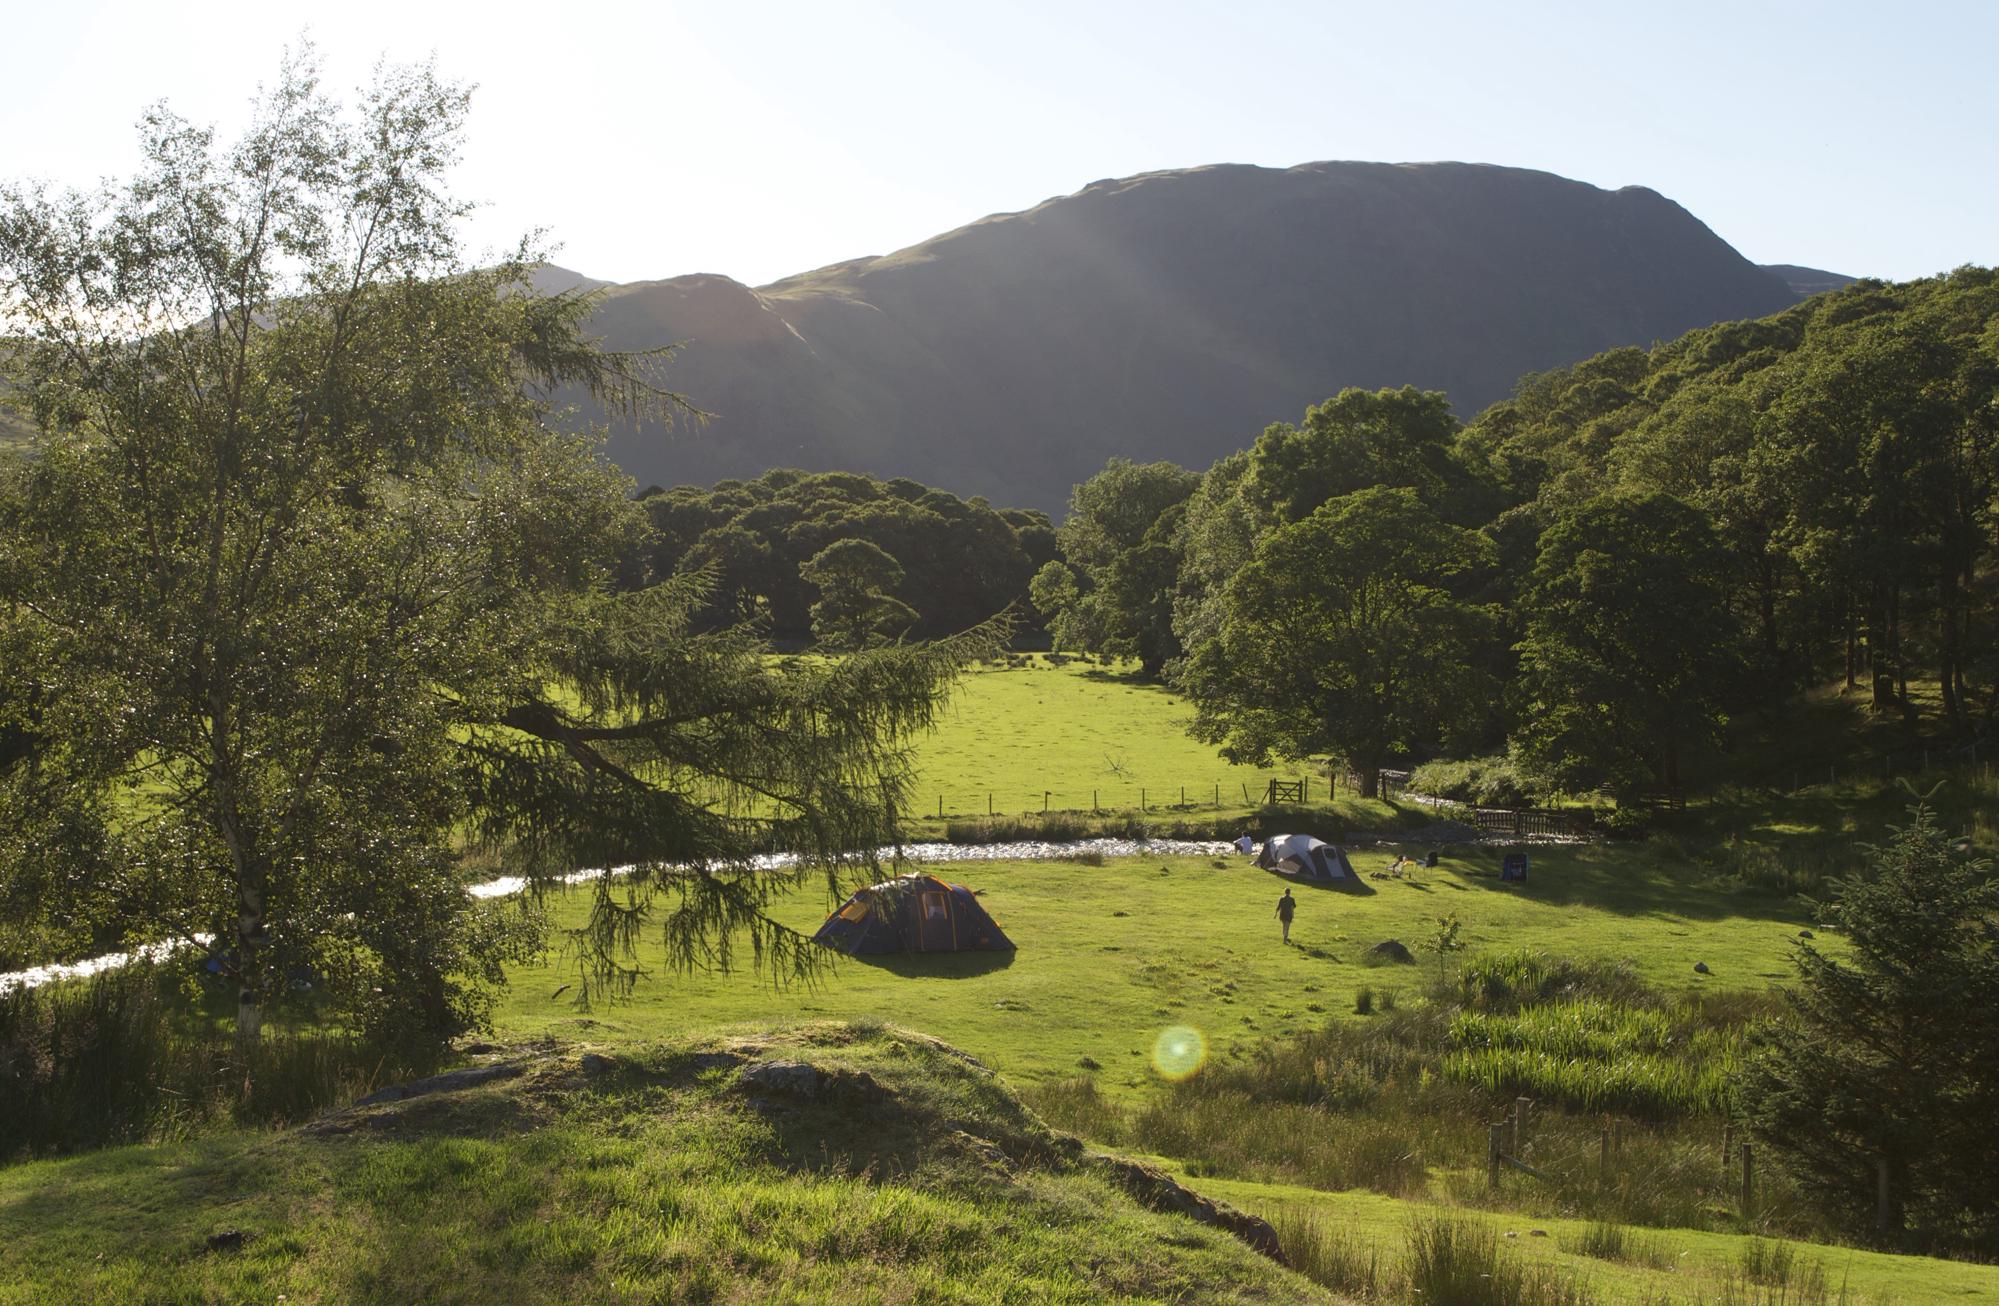 Borrowdale Camping – The best campsites in Borrowdale, Lake District